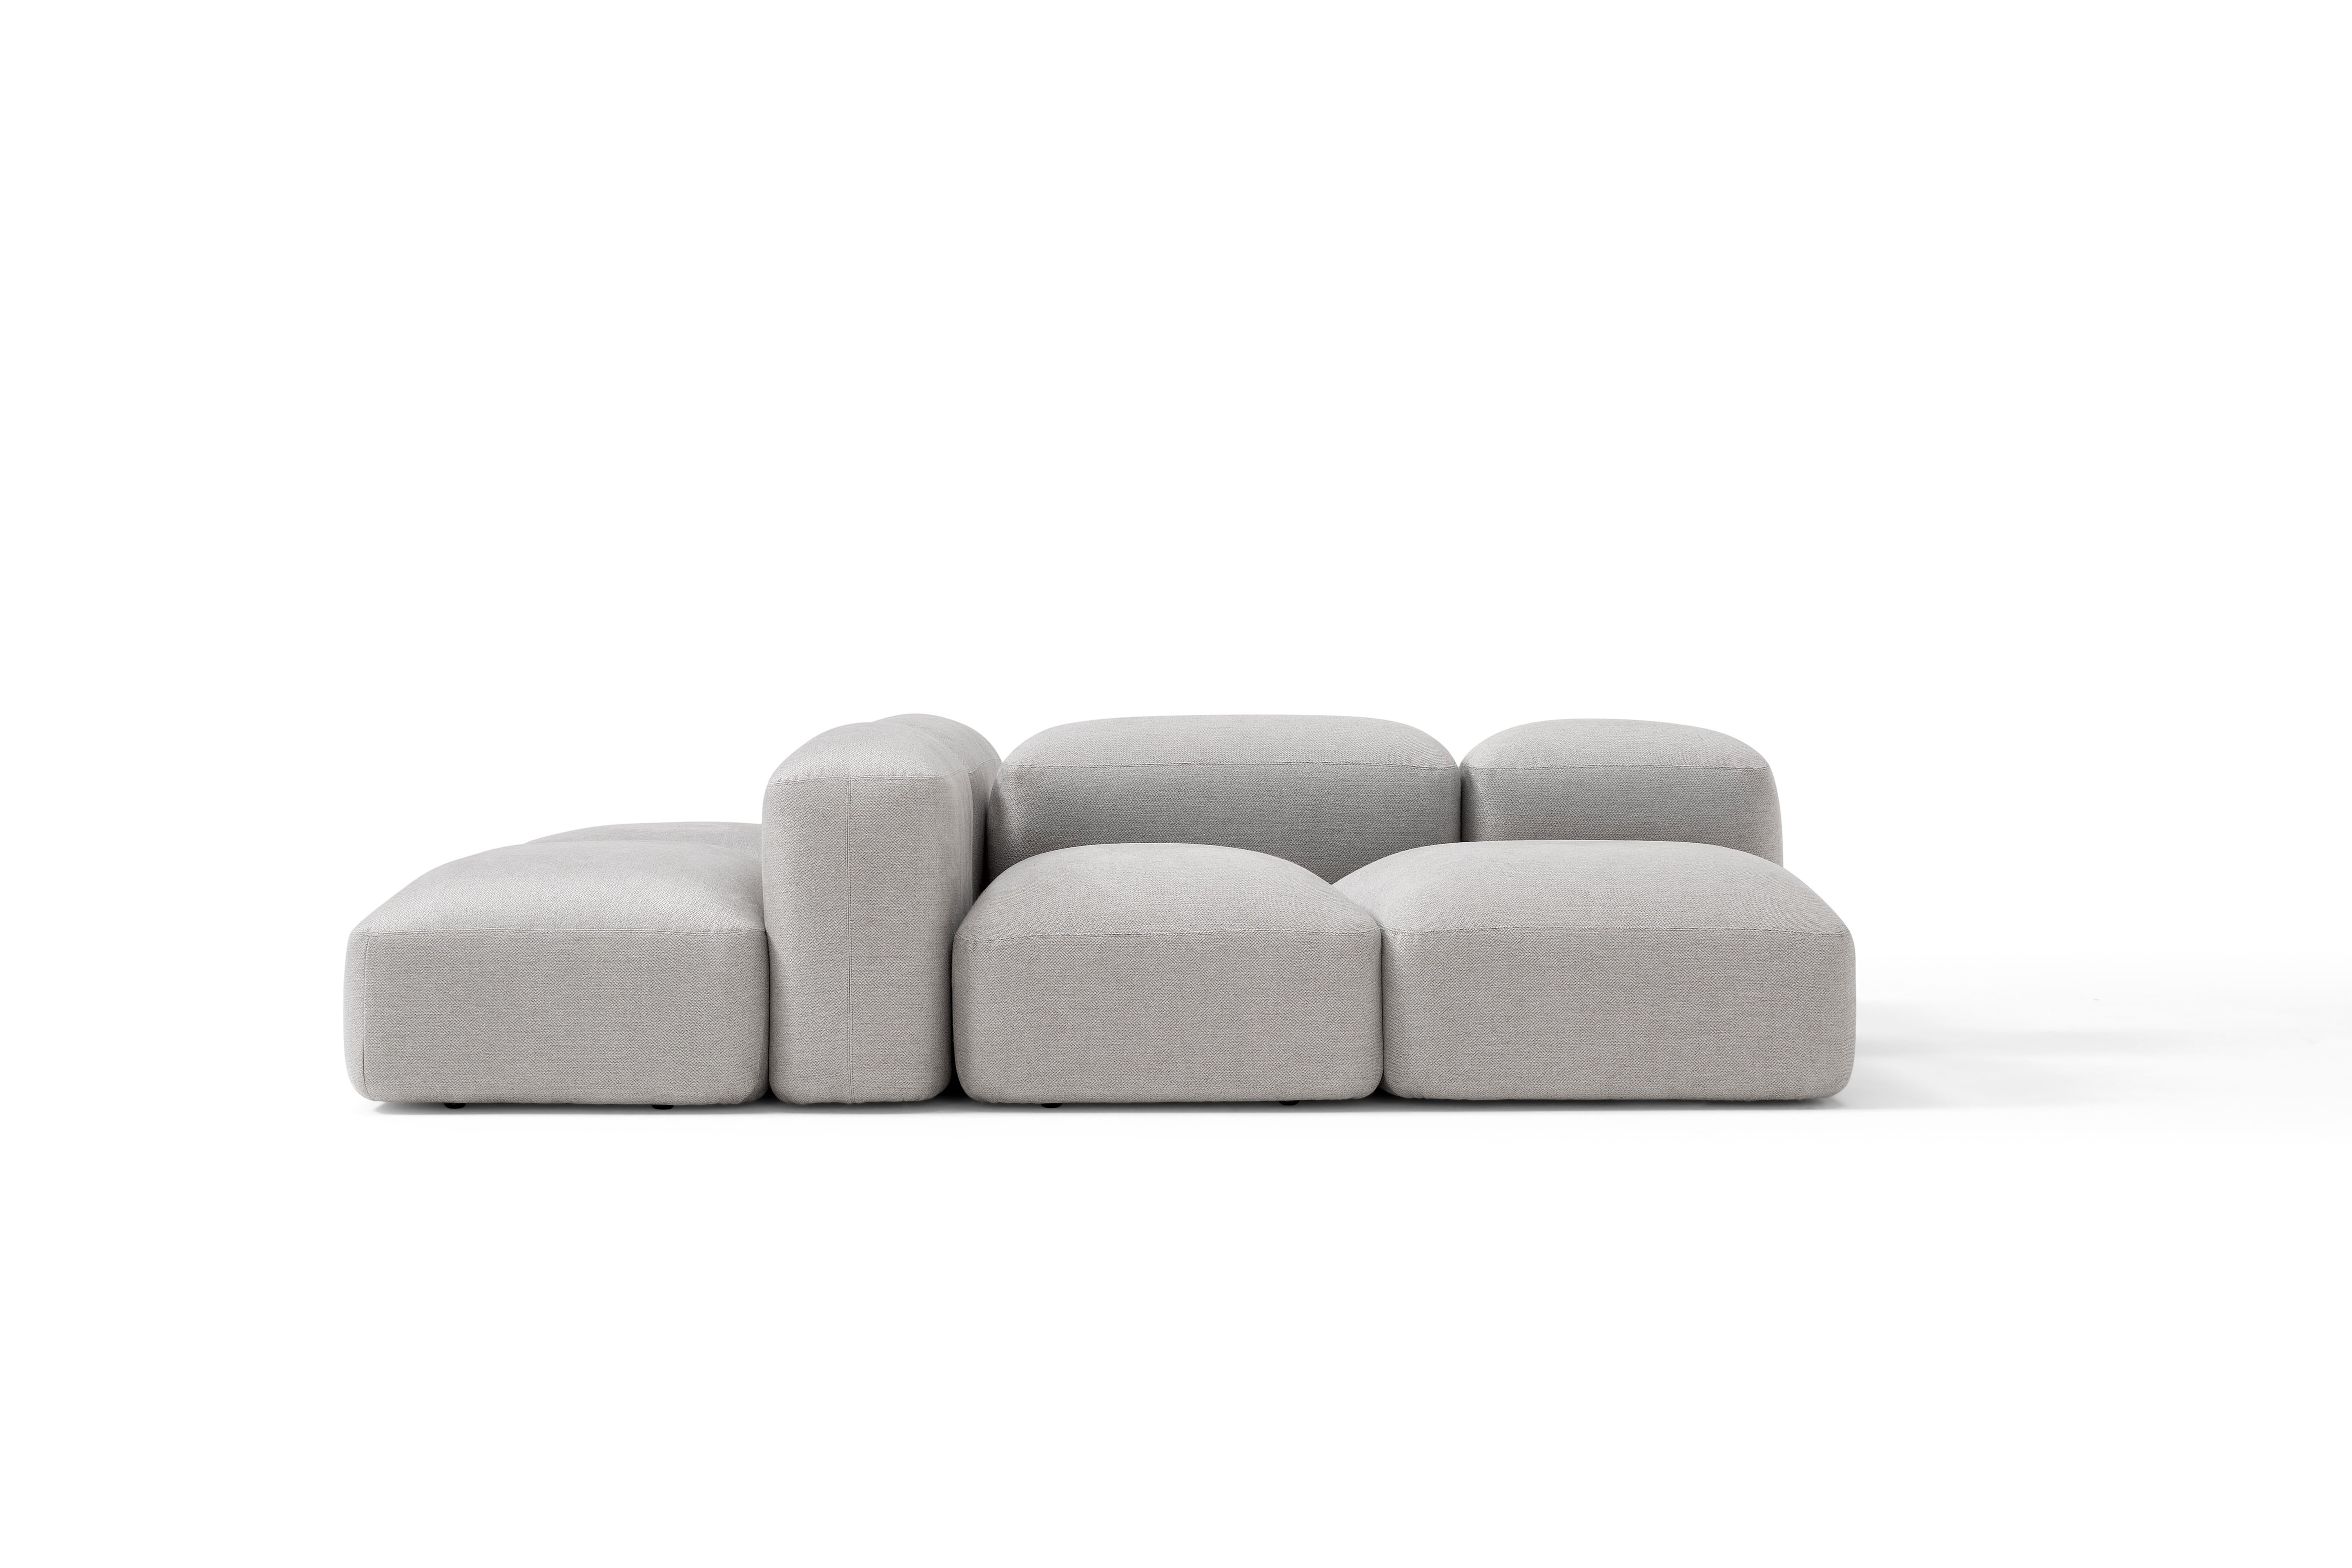 'Lapis' is a collection of sofas and seats with very organic and Minimalist shapes. 
Designer: Emanuel Gargano
Maker: Amura Lab 

'Lapis' can be made in several dimension and combinations, according to spaces and needs: from the most Classic and